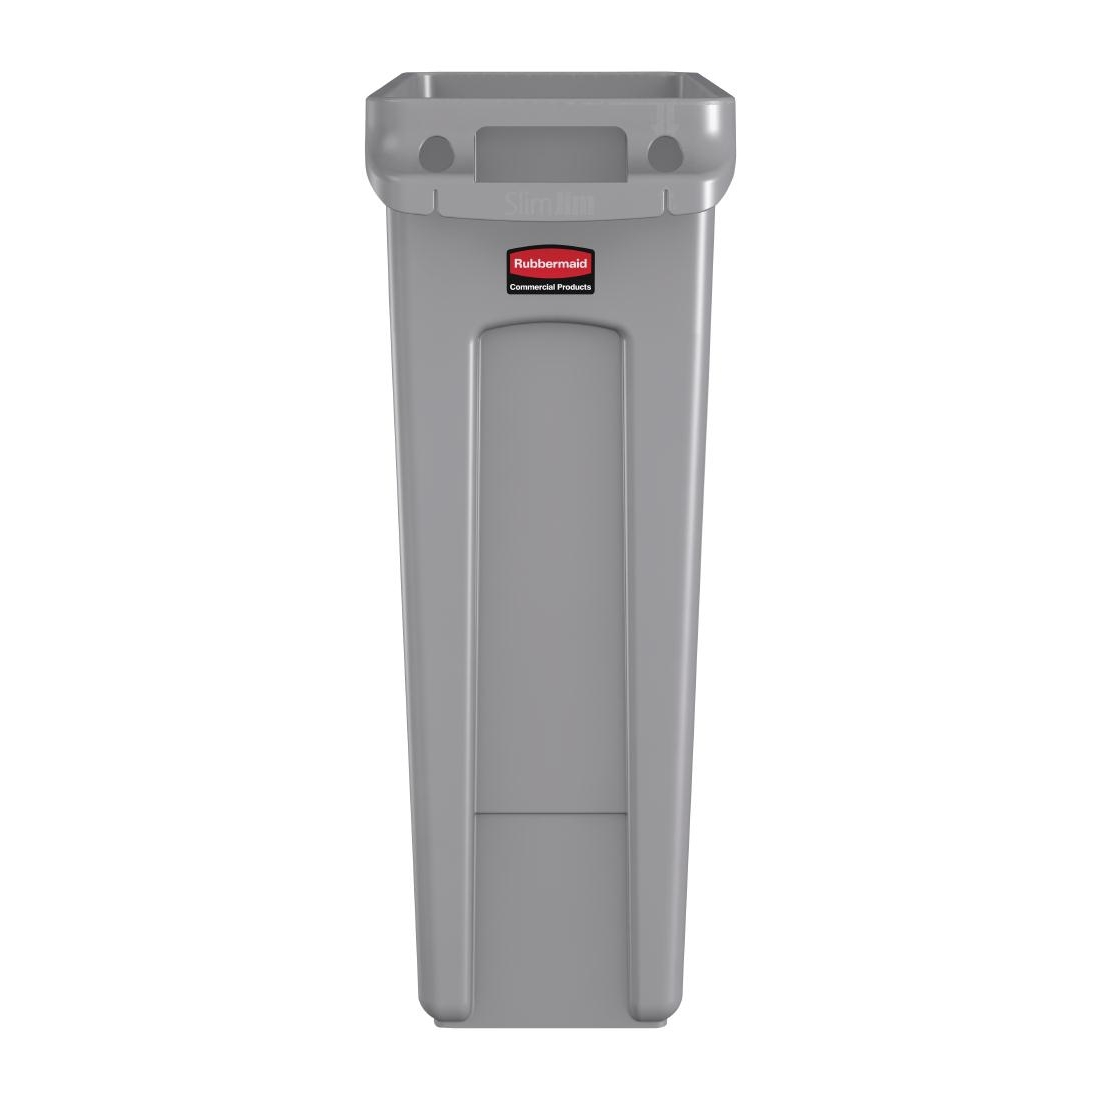 Rubbermaid Slim Jim Container with Venting Channels Grey 87Ltr